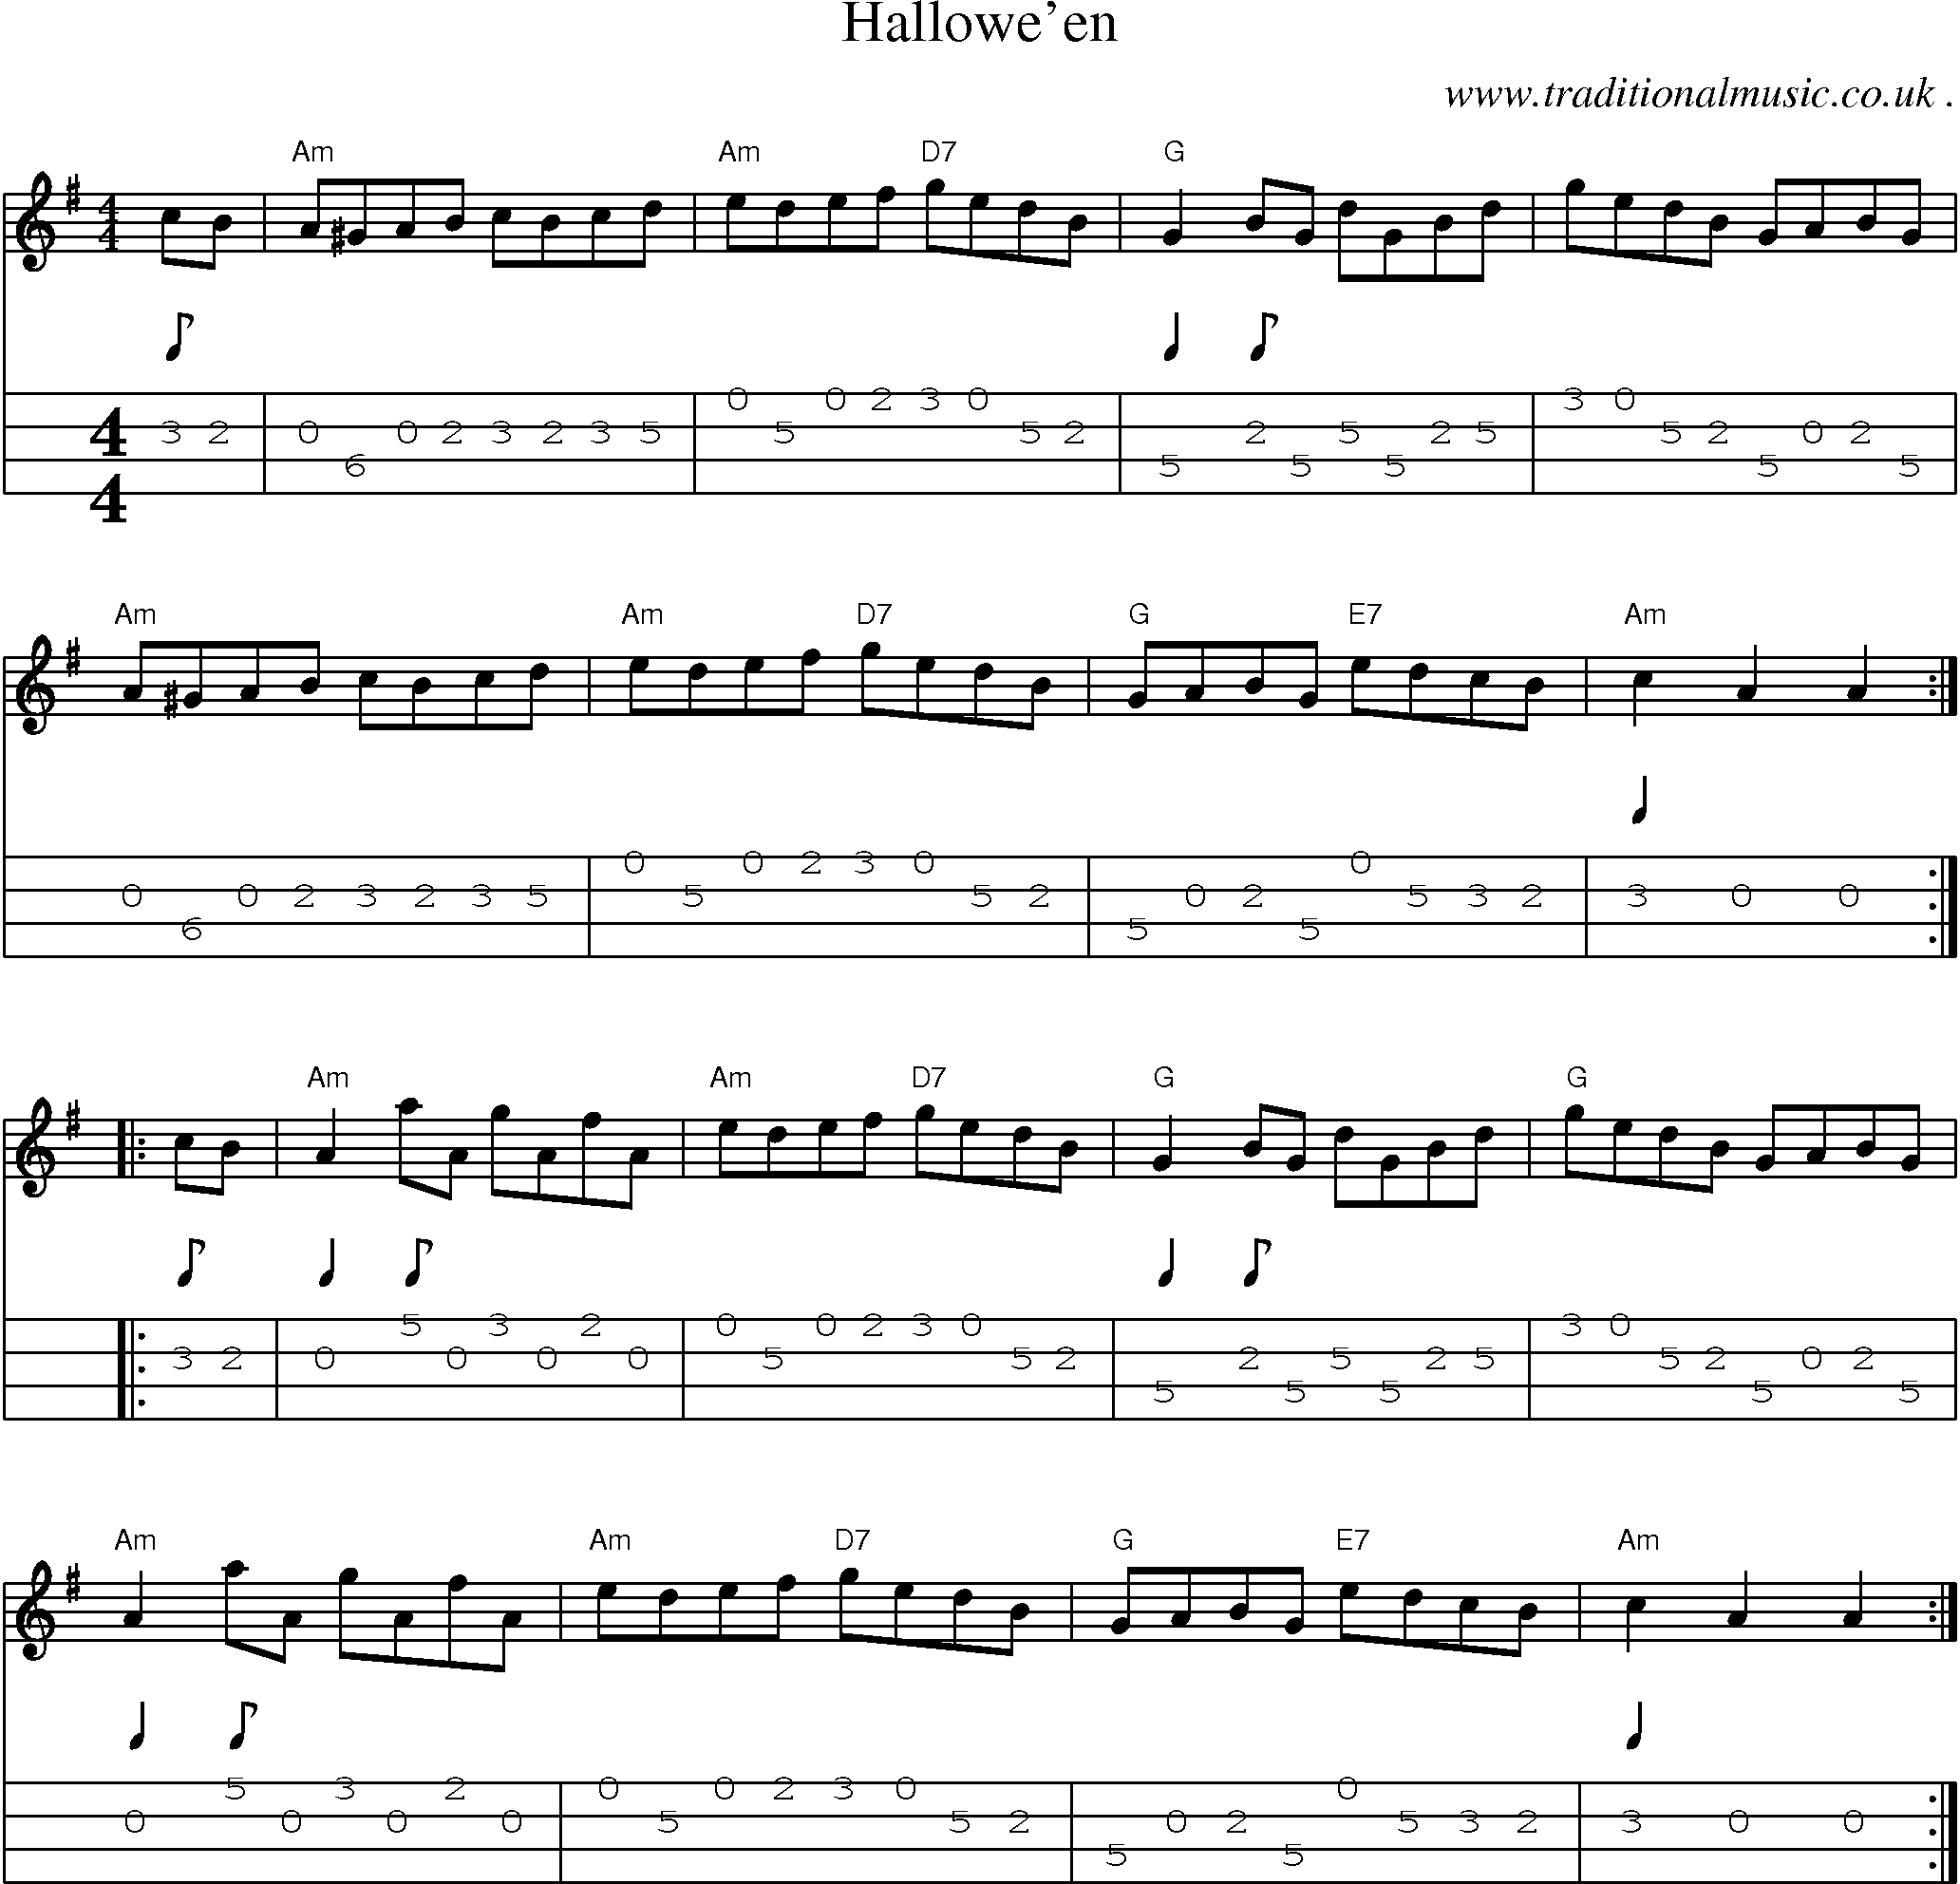 Music Score and Guitar Tabs for Halloween